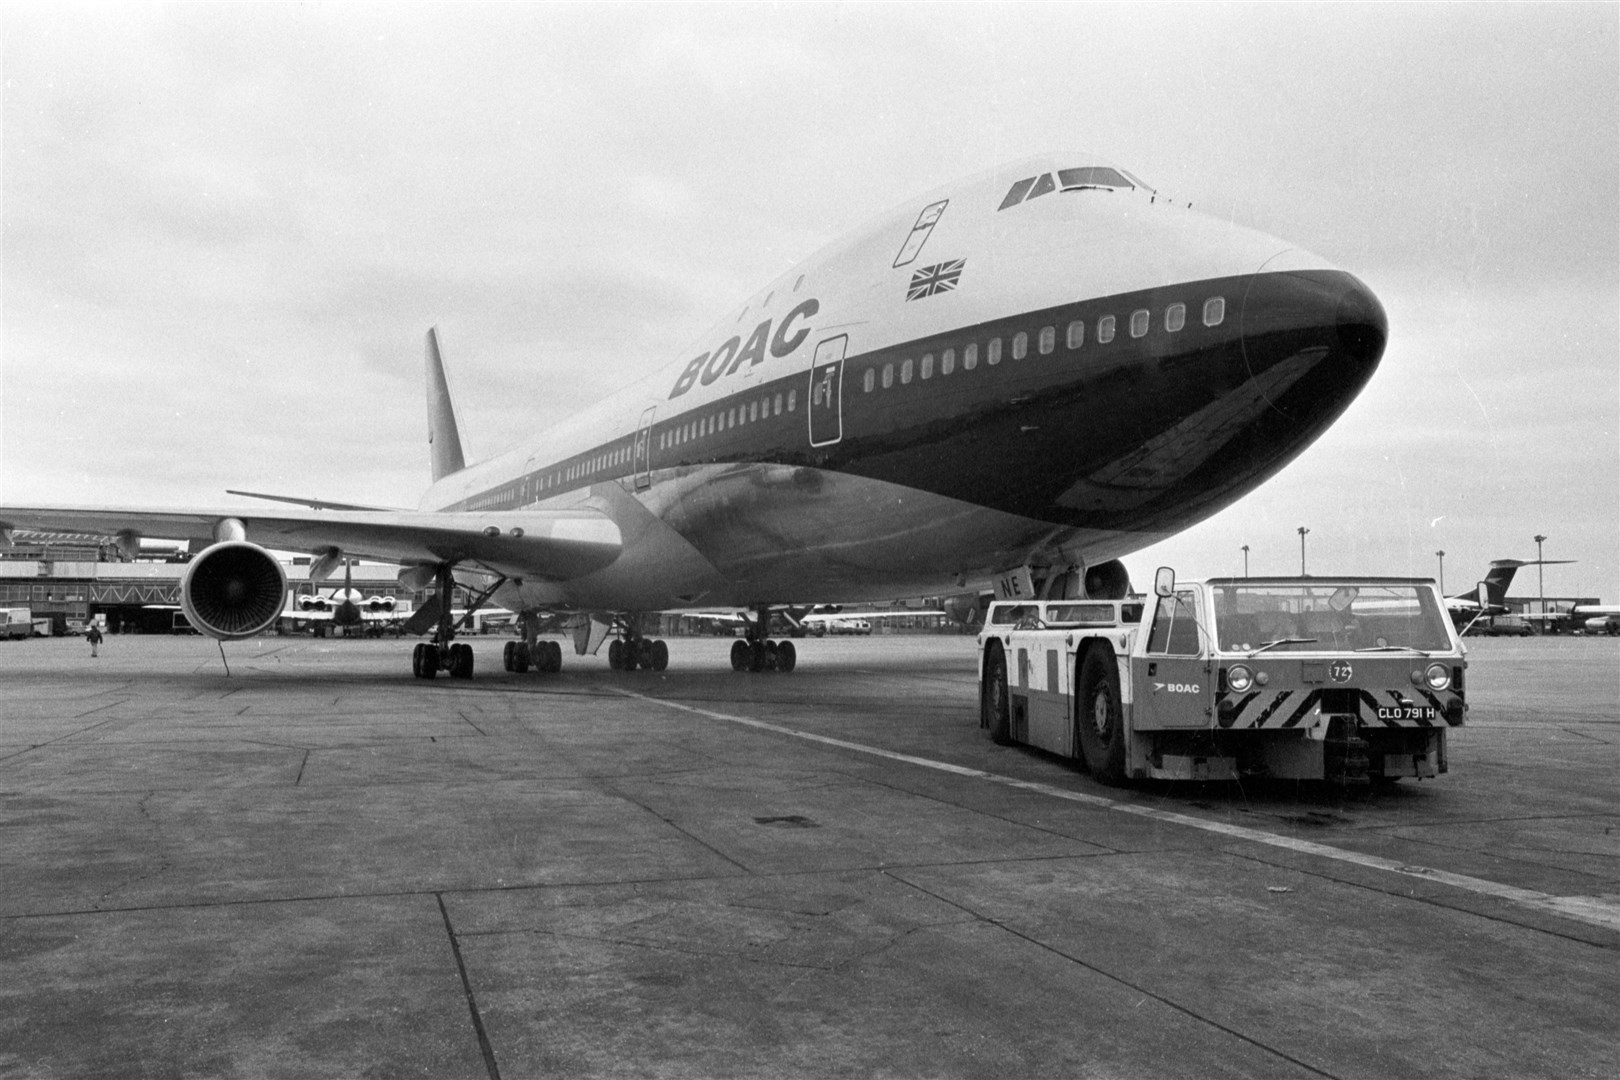 Boeing 747 in British Overseas Airways Corporation (BOAC) livery at London’s Heathrow Airport in 1971 (PA)